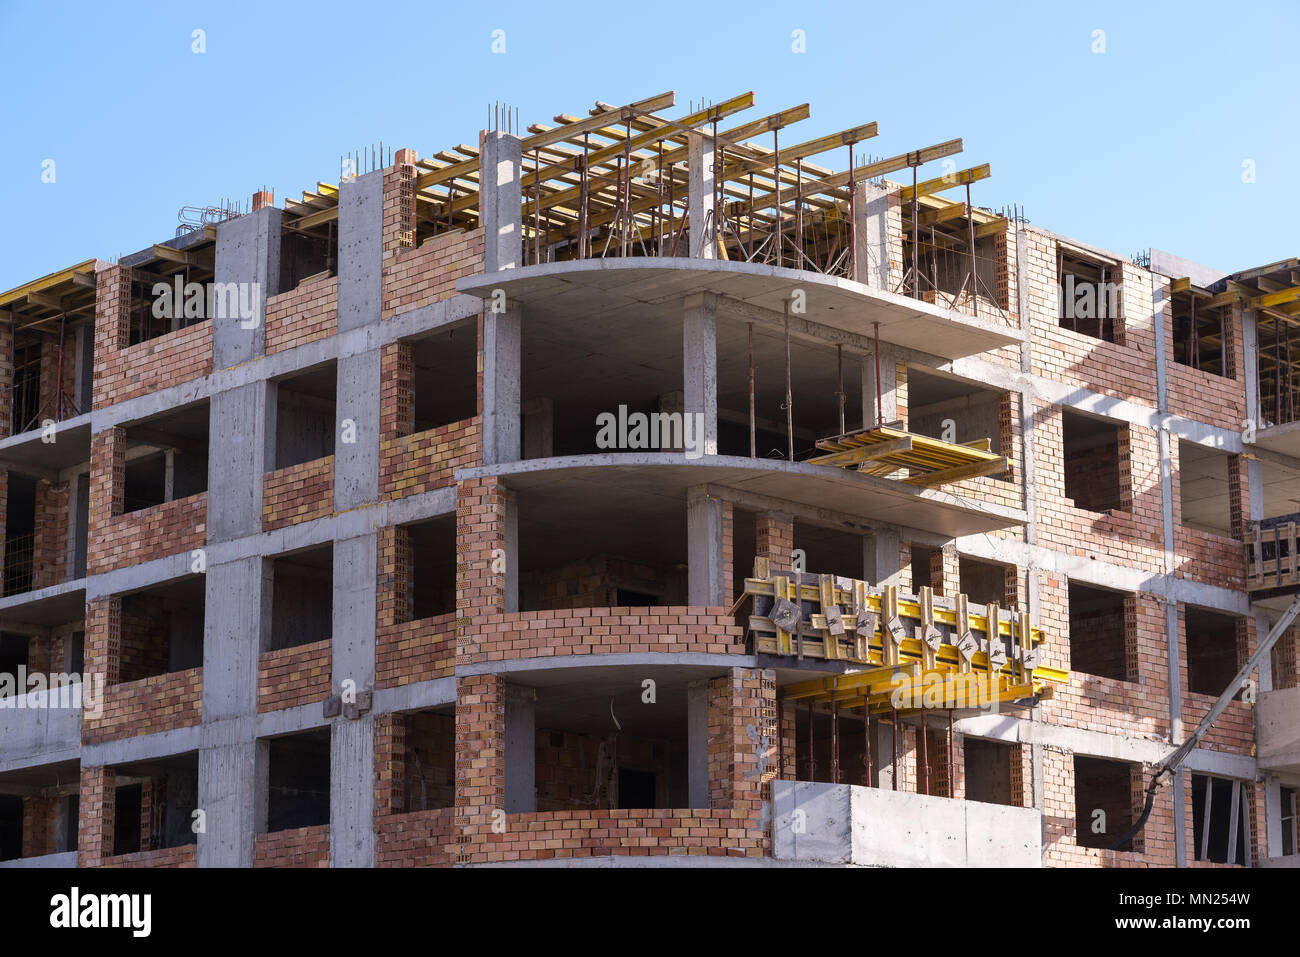 Build large residential buildings. Stock Photo